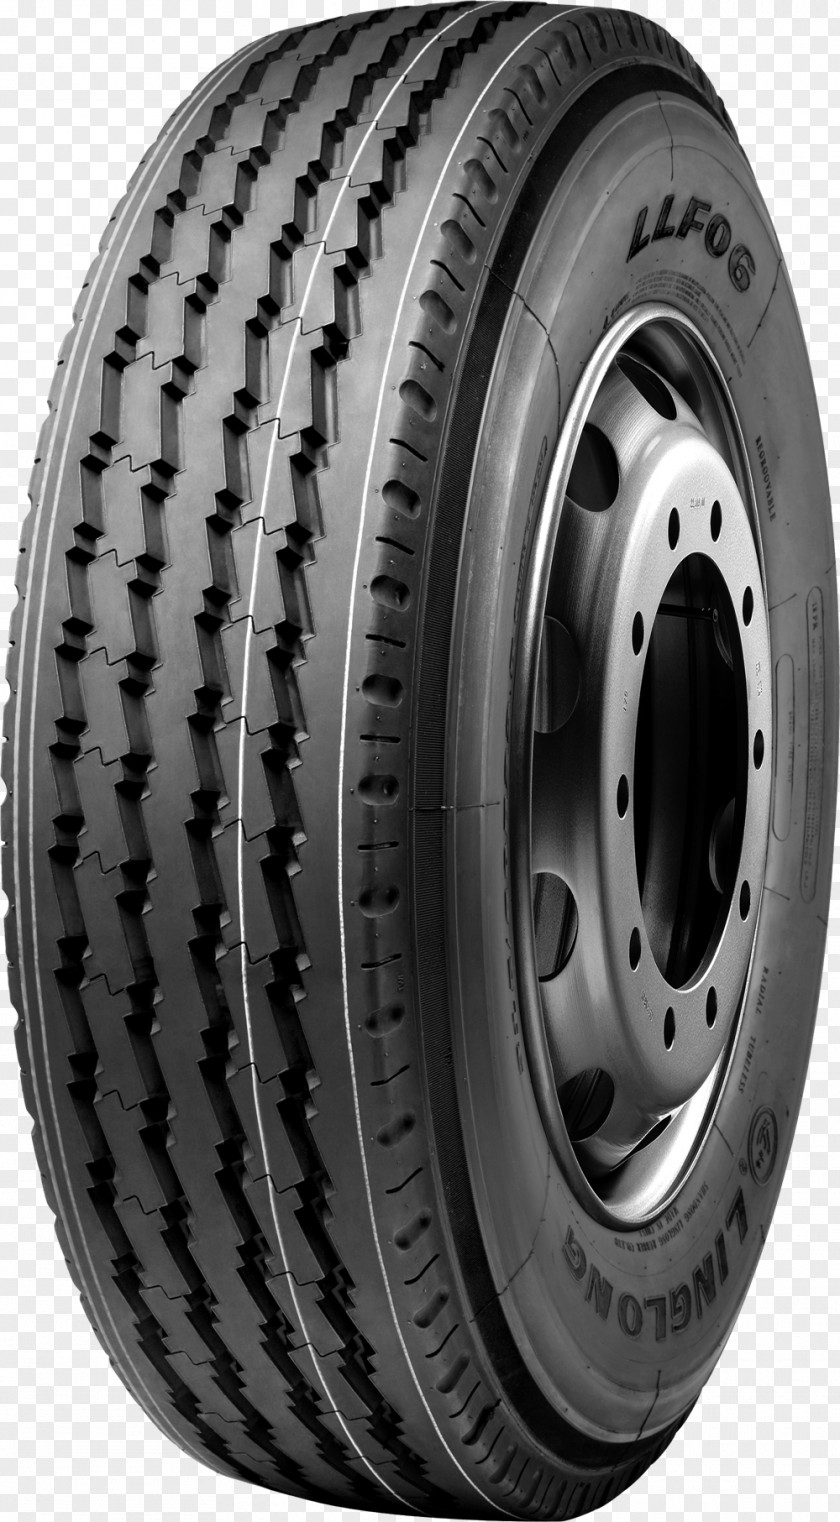 Truck Goodyear Tire And Rubber Company Tread Linglong PNG